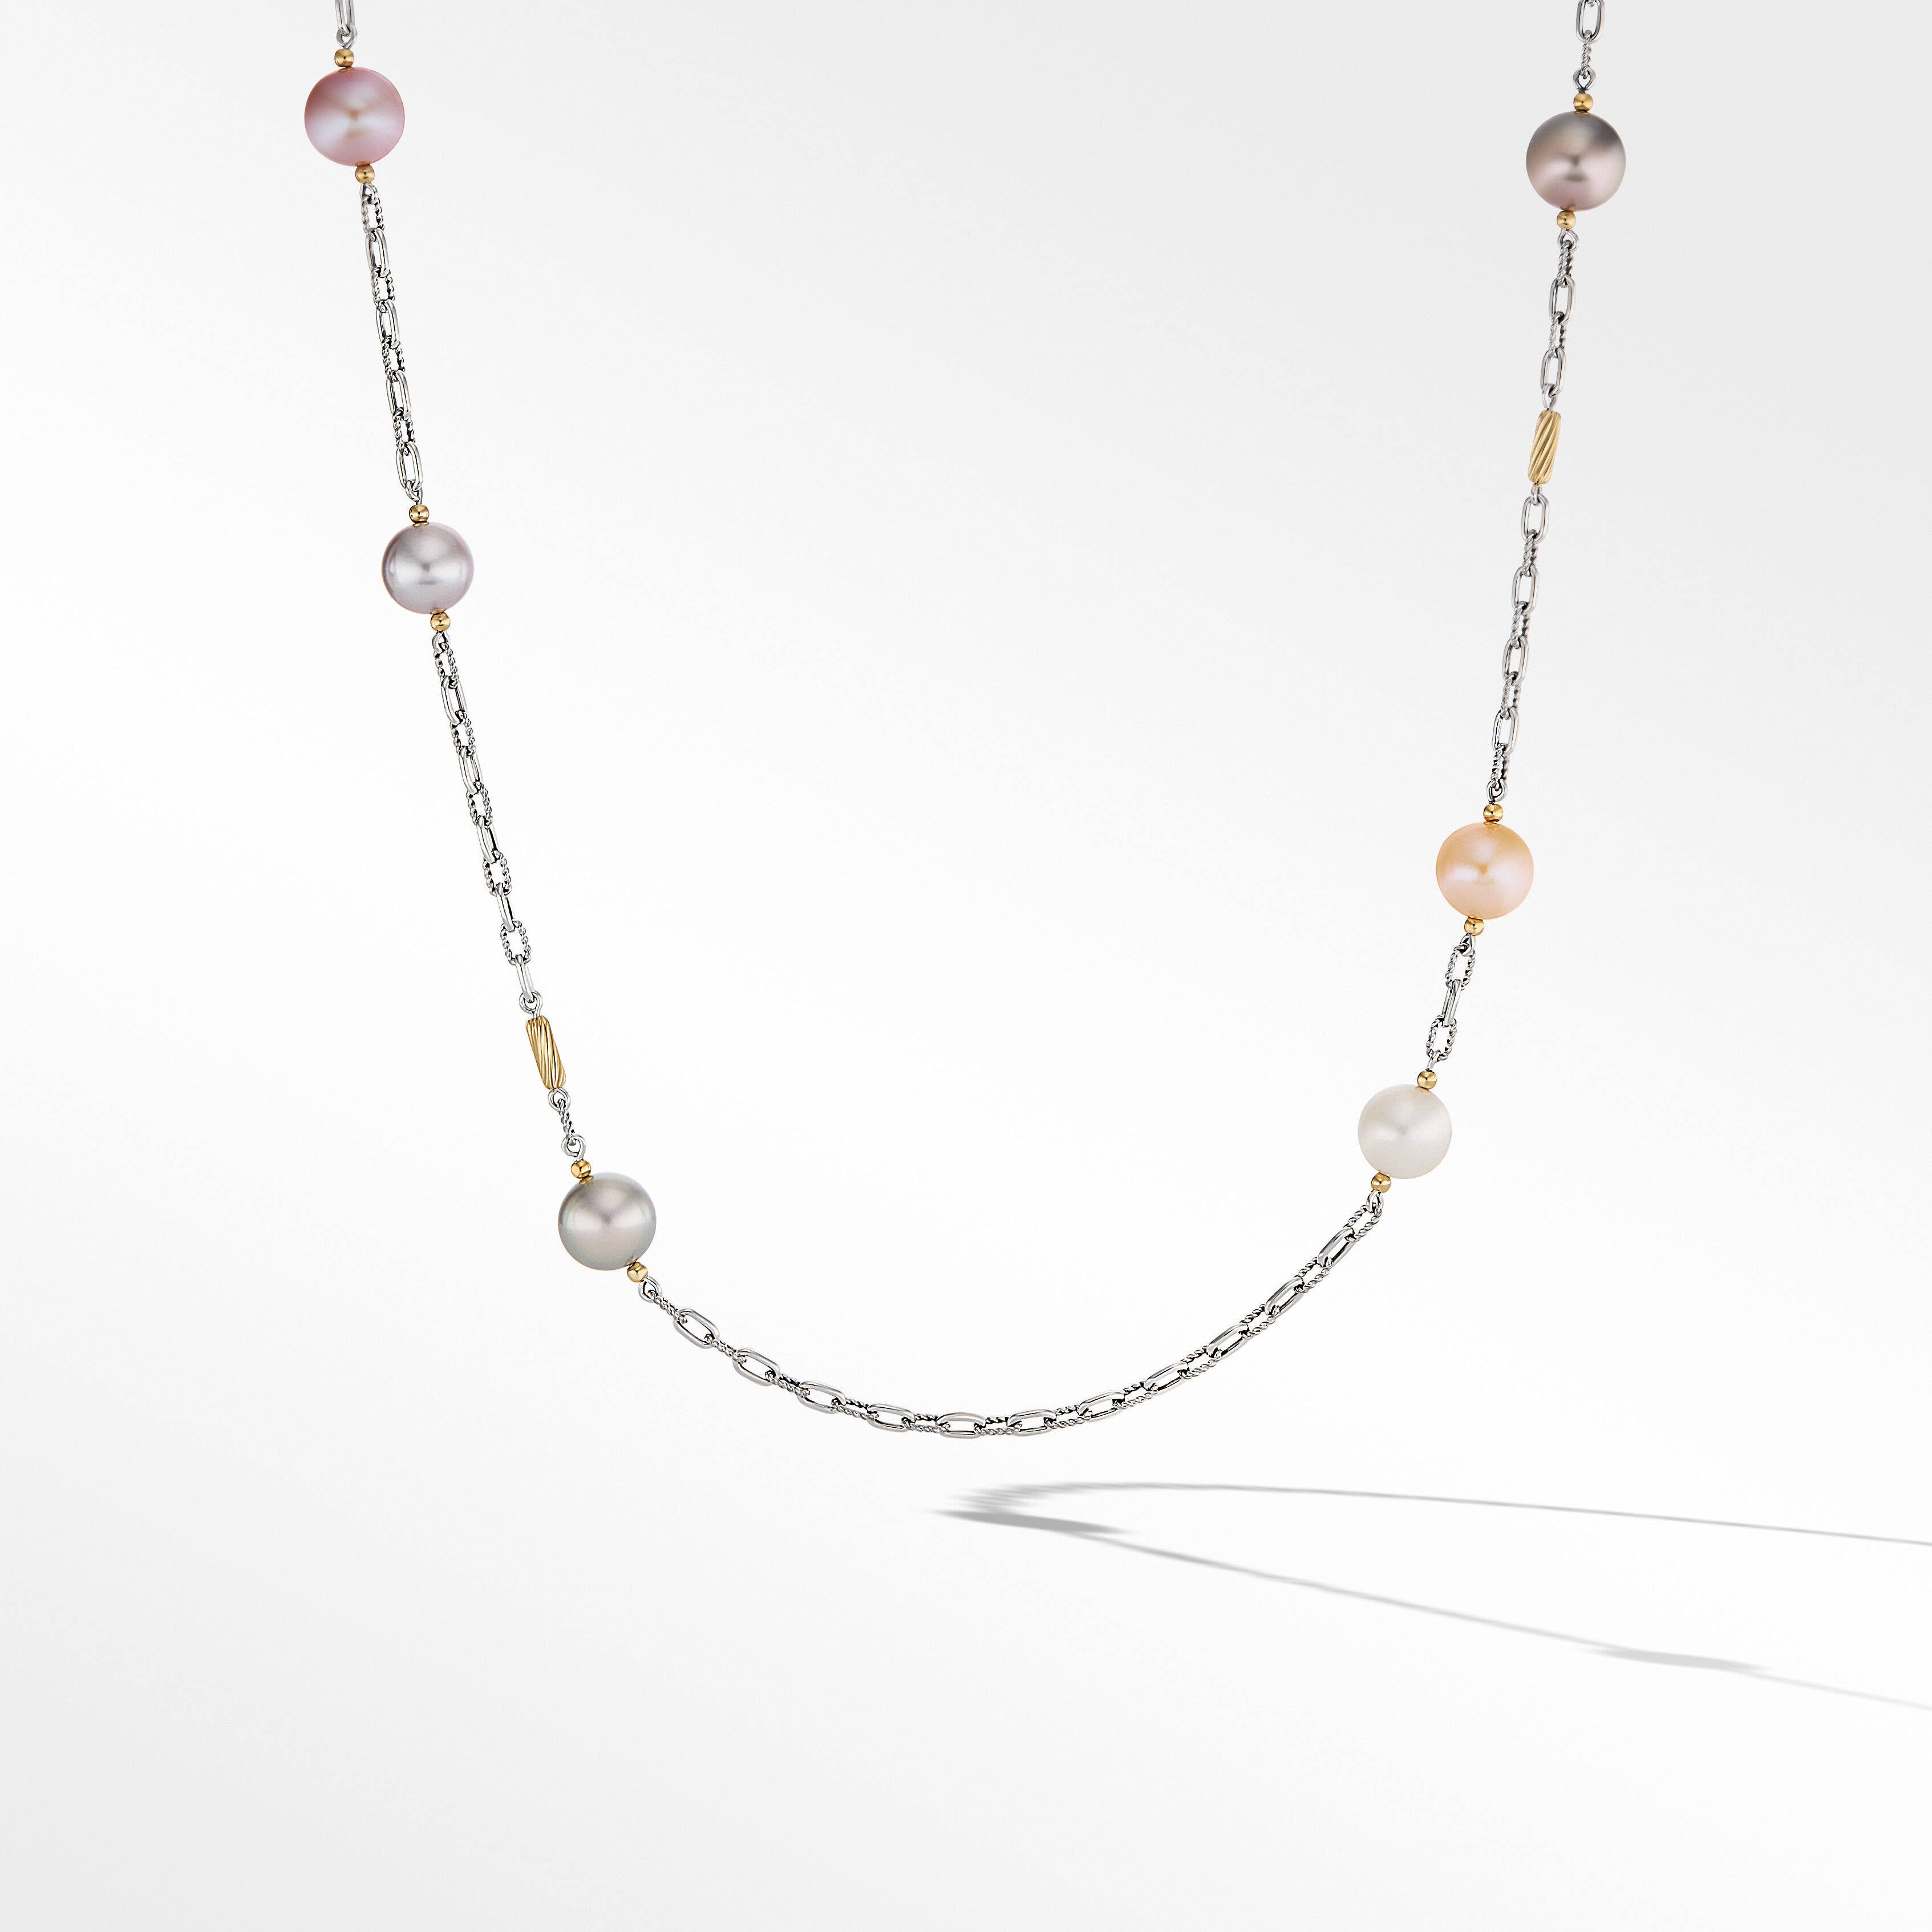 DY Madison® Colour Pearl Necklace in Sterling Silver with 18K Yellow Gold